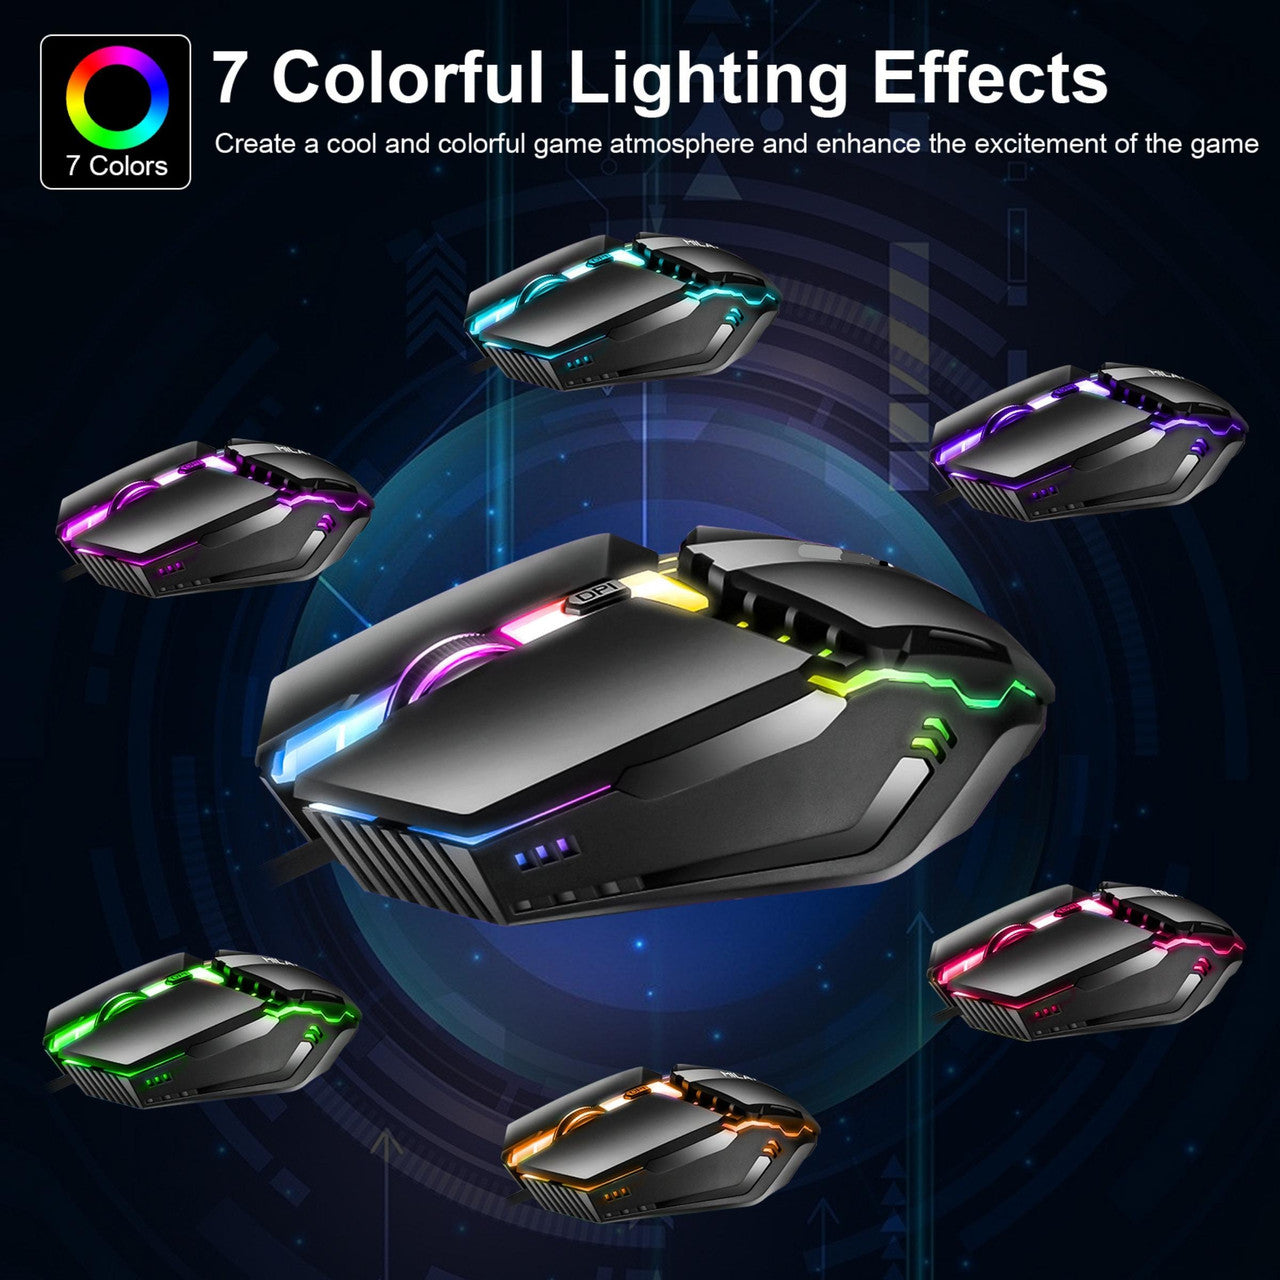 LED PC Gaming Mouse Wired - USB Optical Computer Mouse with Rgb Backlit, 3 Adjustable Dpi up to 1600, 7 Light Effects, Ergonomic Gamer Laptop PC Mouse